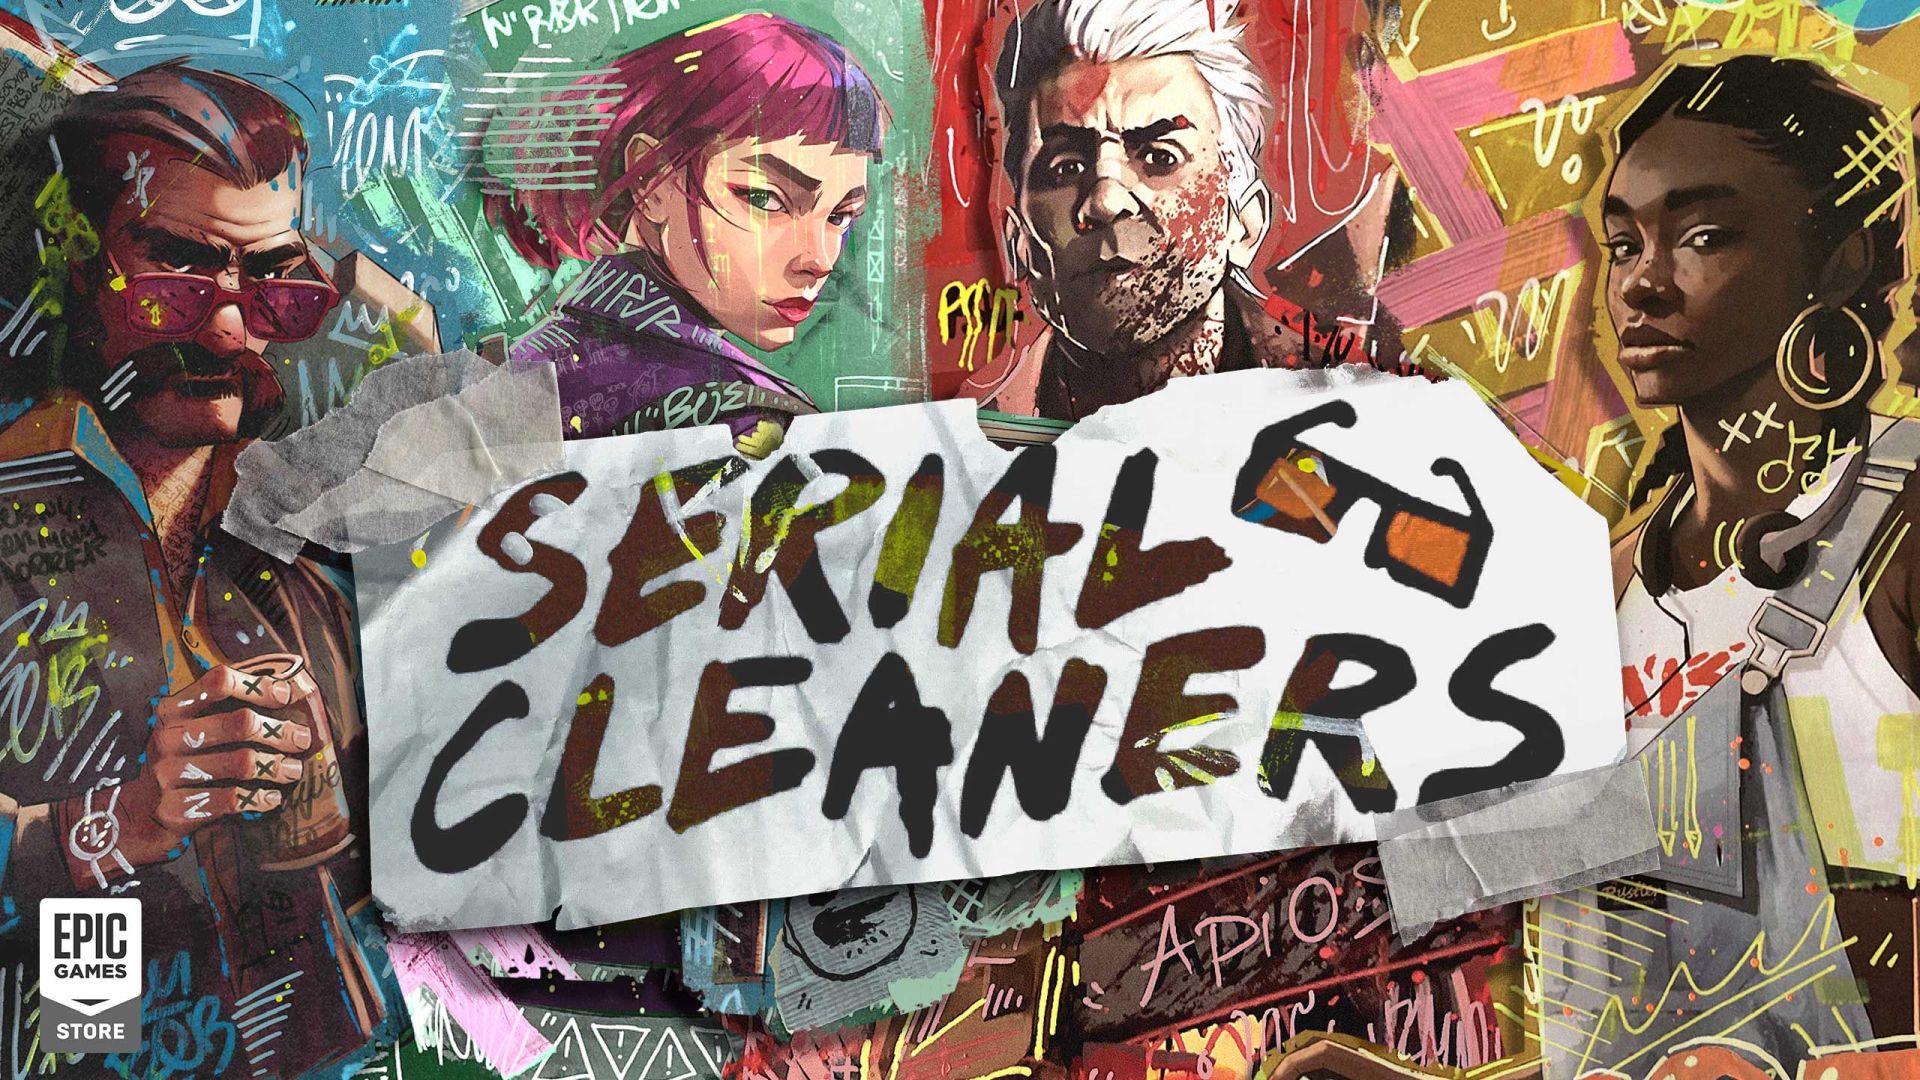 Video: Serial Cleaners – Dino Park DLC